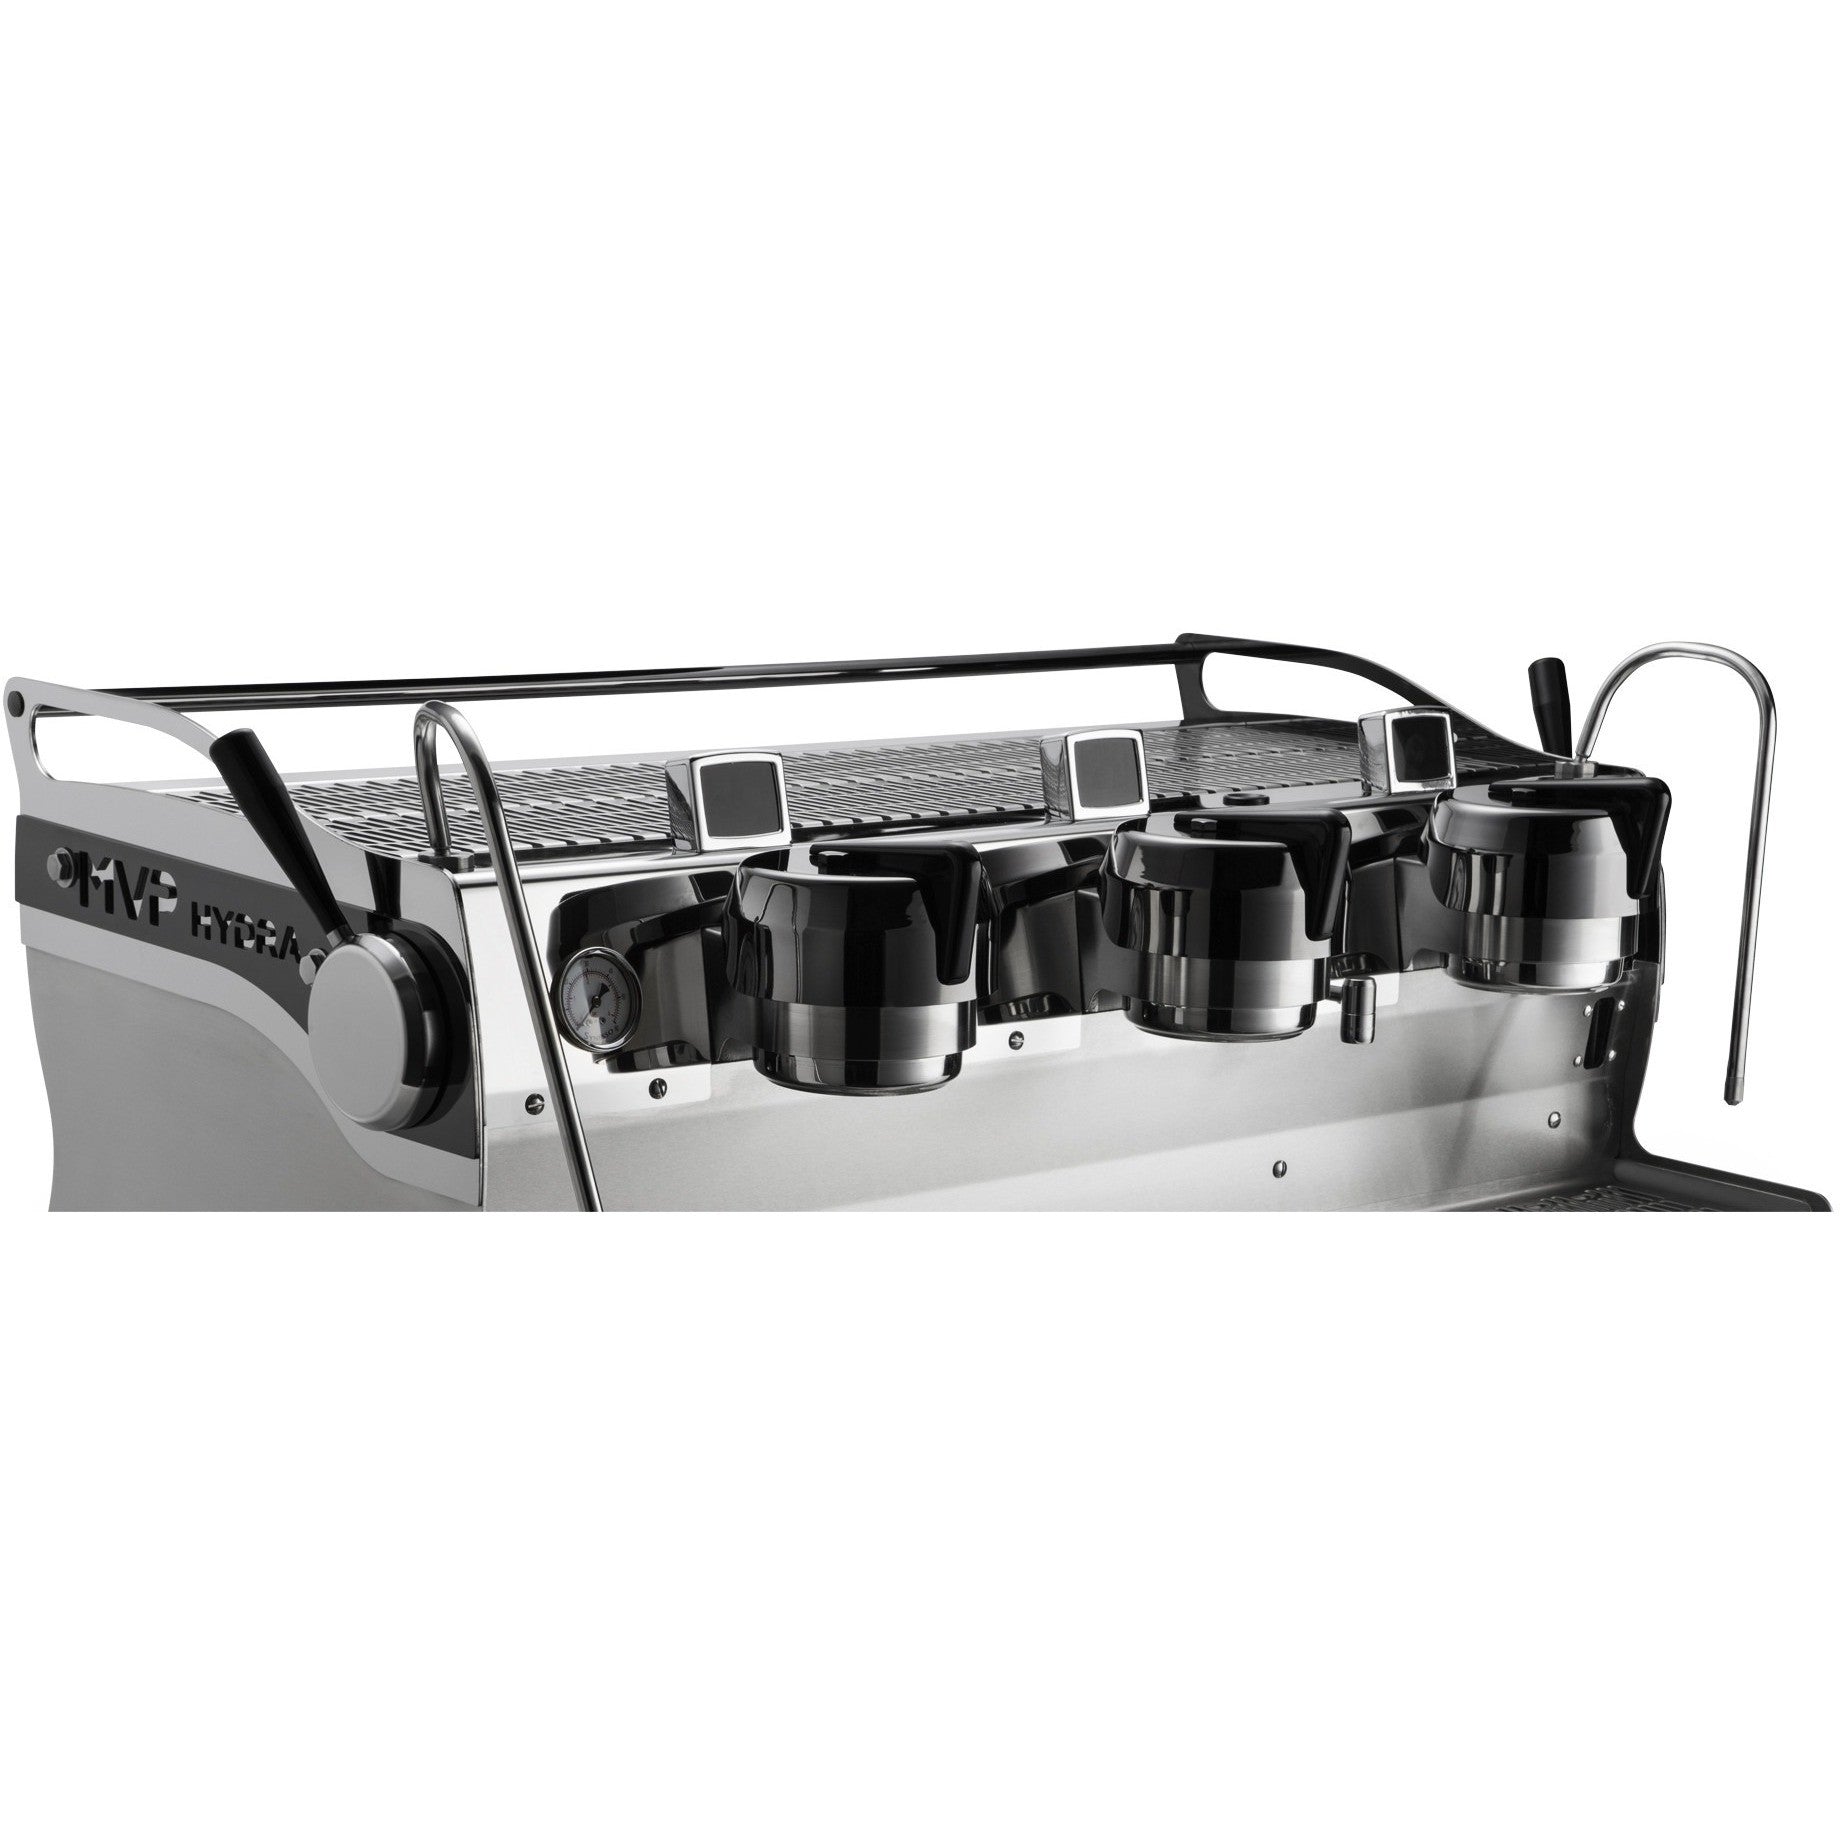 Synesso MVP Hydra Commercial Espresso Machine - 2 Group / Stainless Steel (Standard) / Black Accents (Standard)